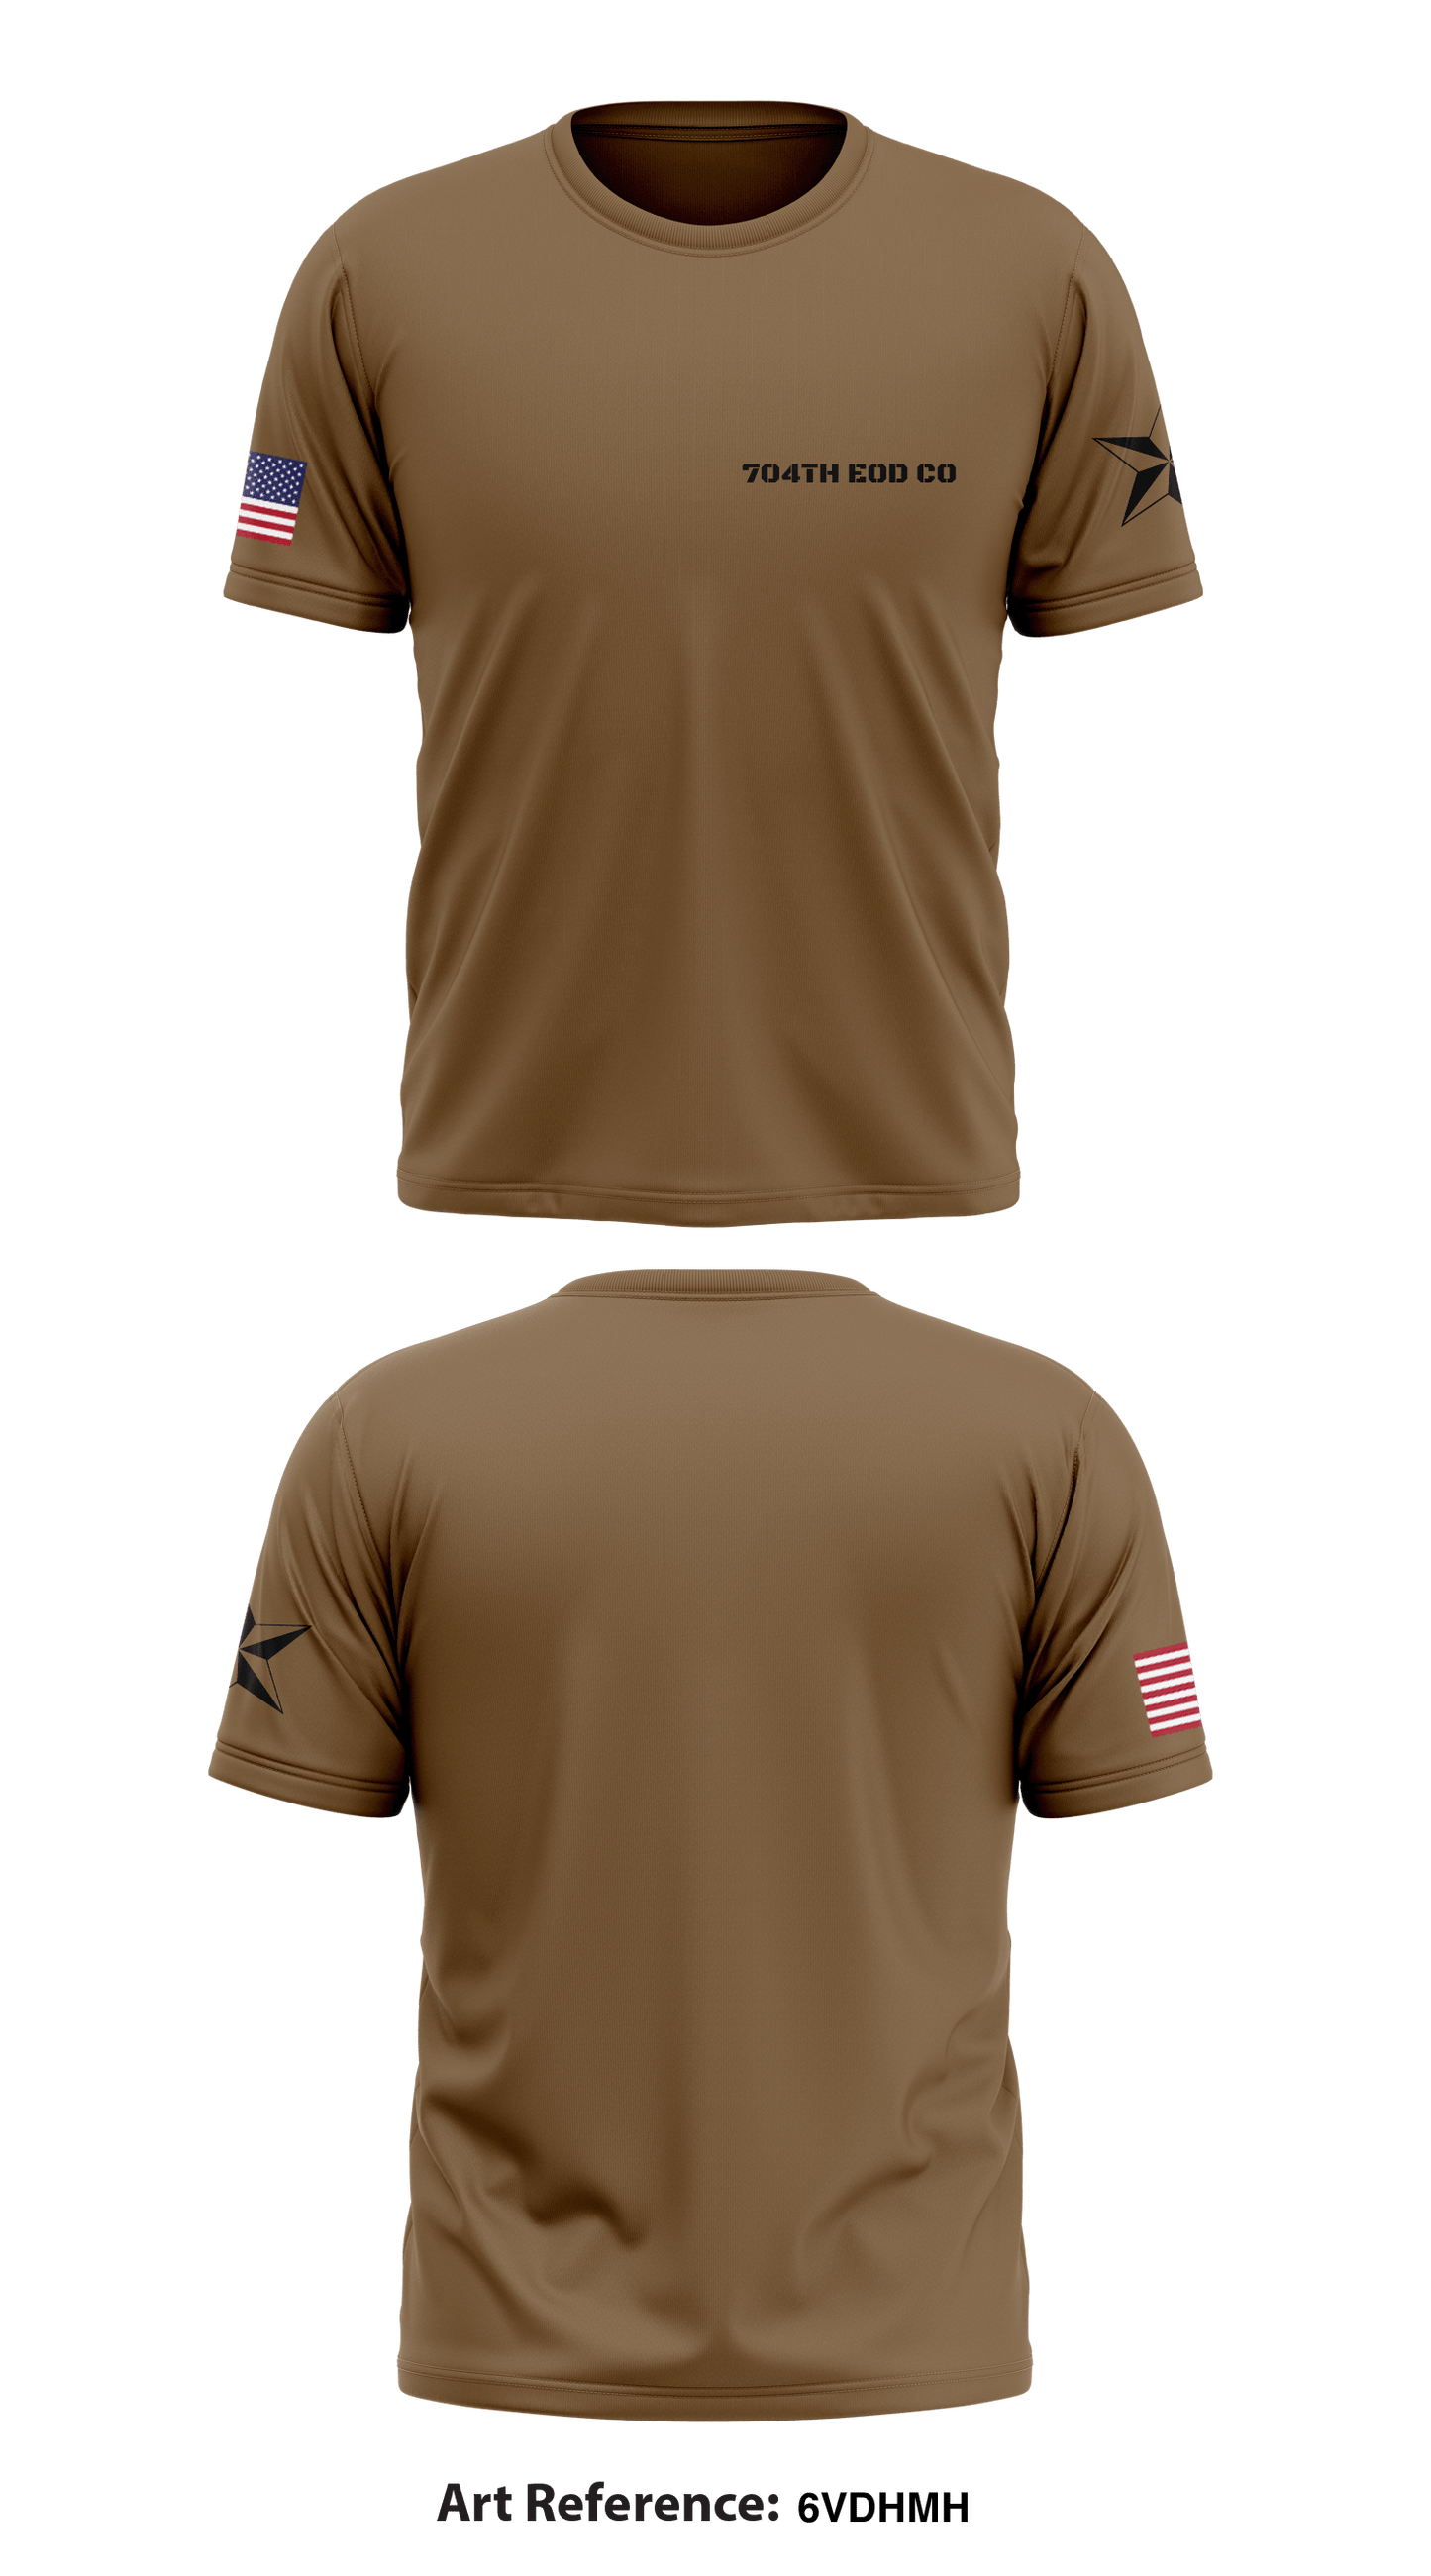 704TH EOD CO Store 1 Core Men's SS Performance Tee - 6VDhmH